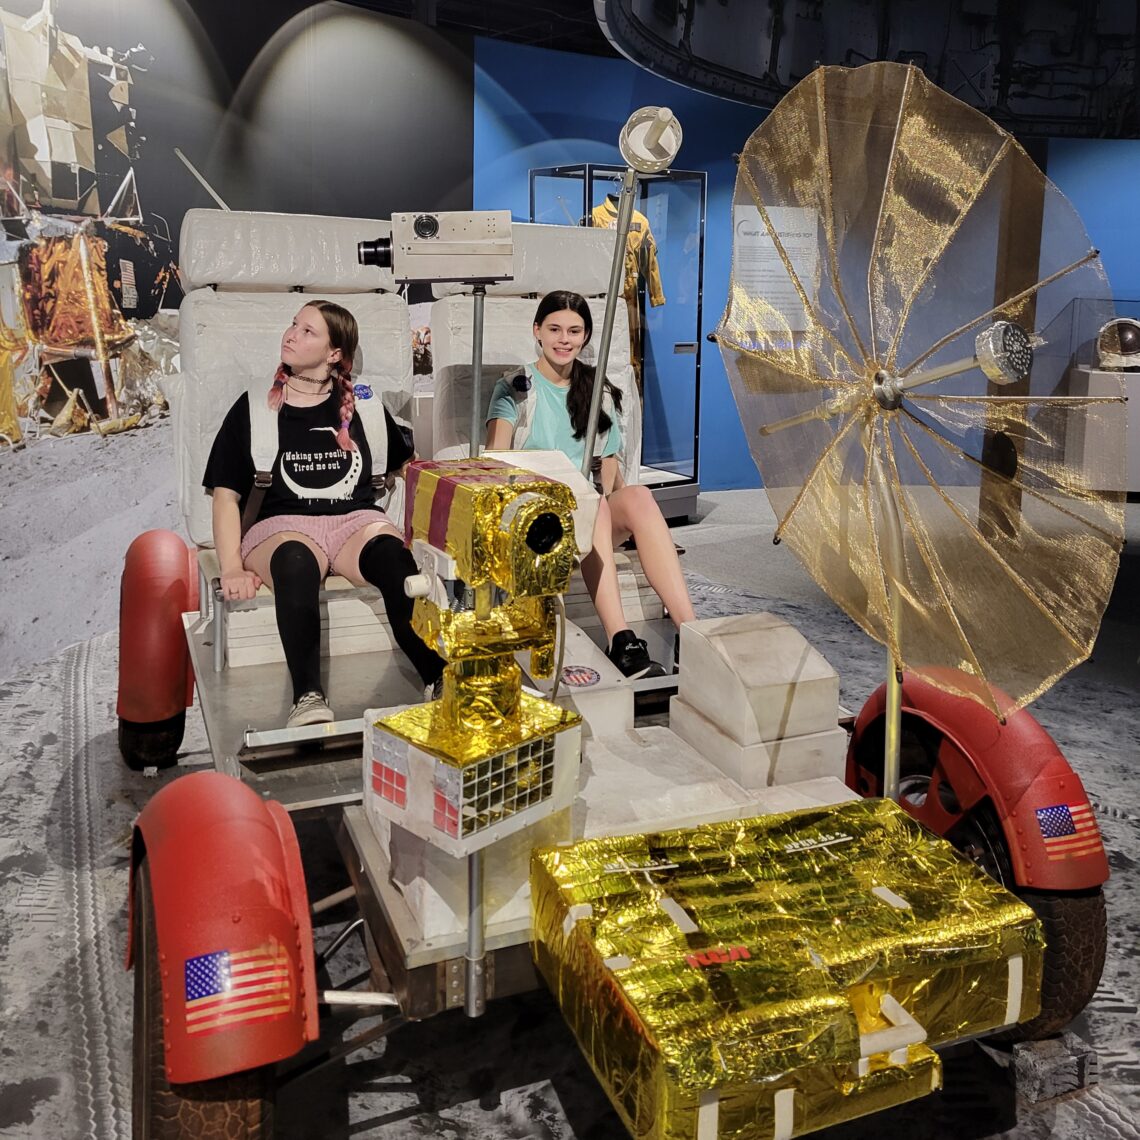 Olie and Lilly on a lunar rover at South Carolina State Museum